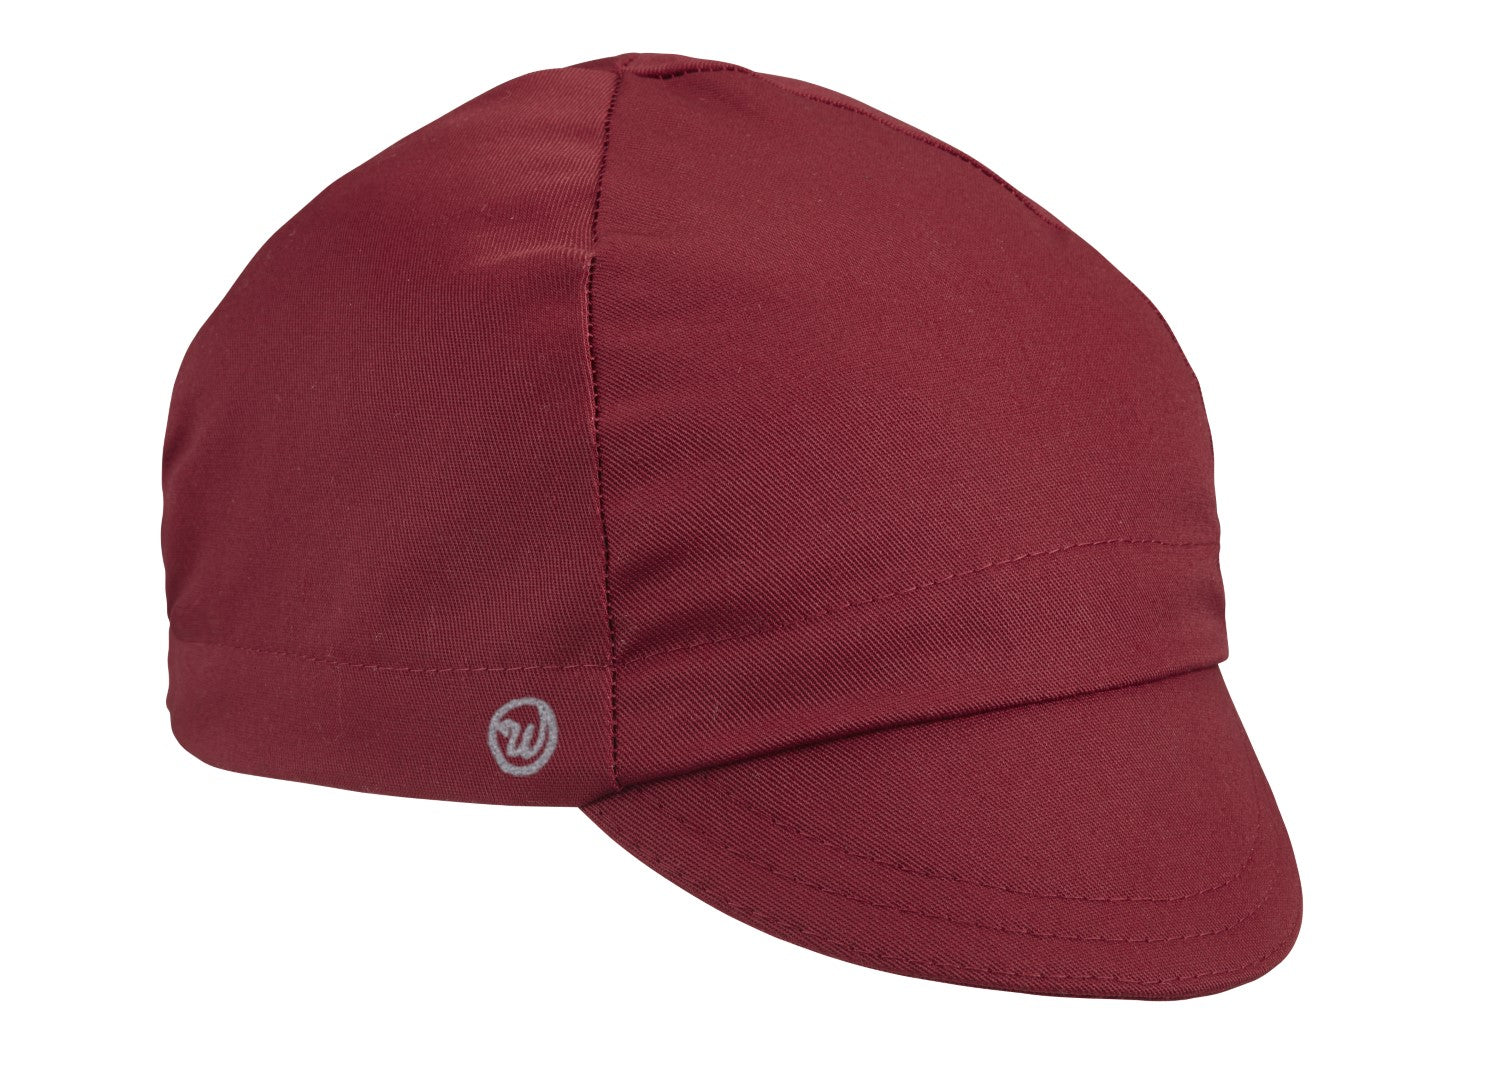 Maroon Cotton 4-Panel Cap.  Angled view.